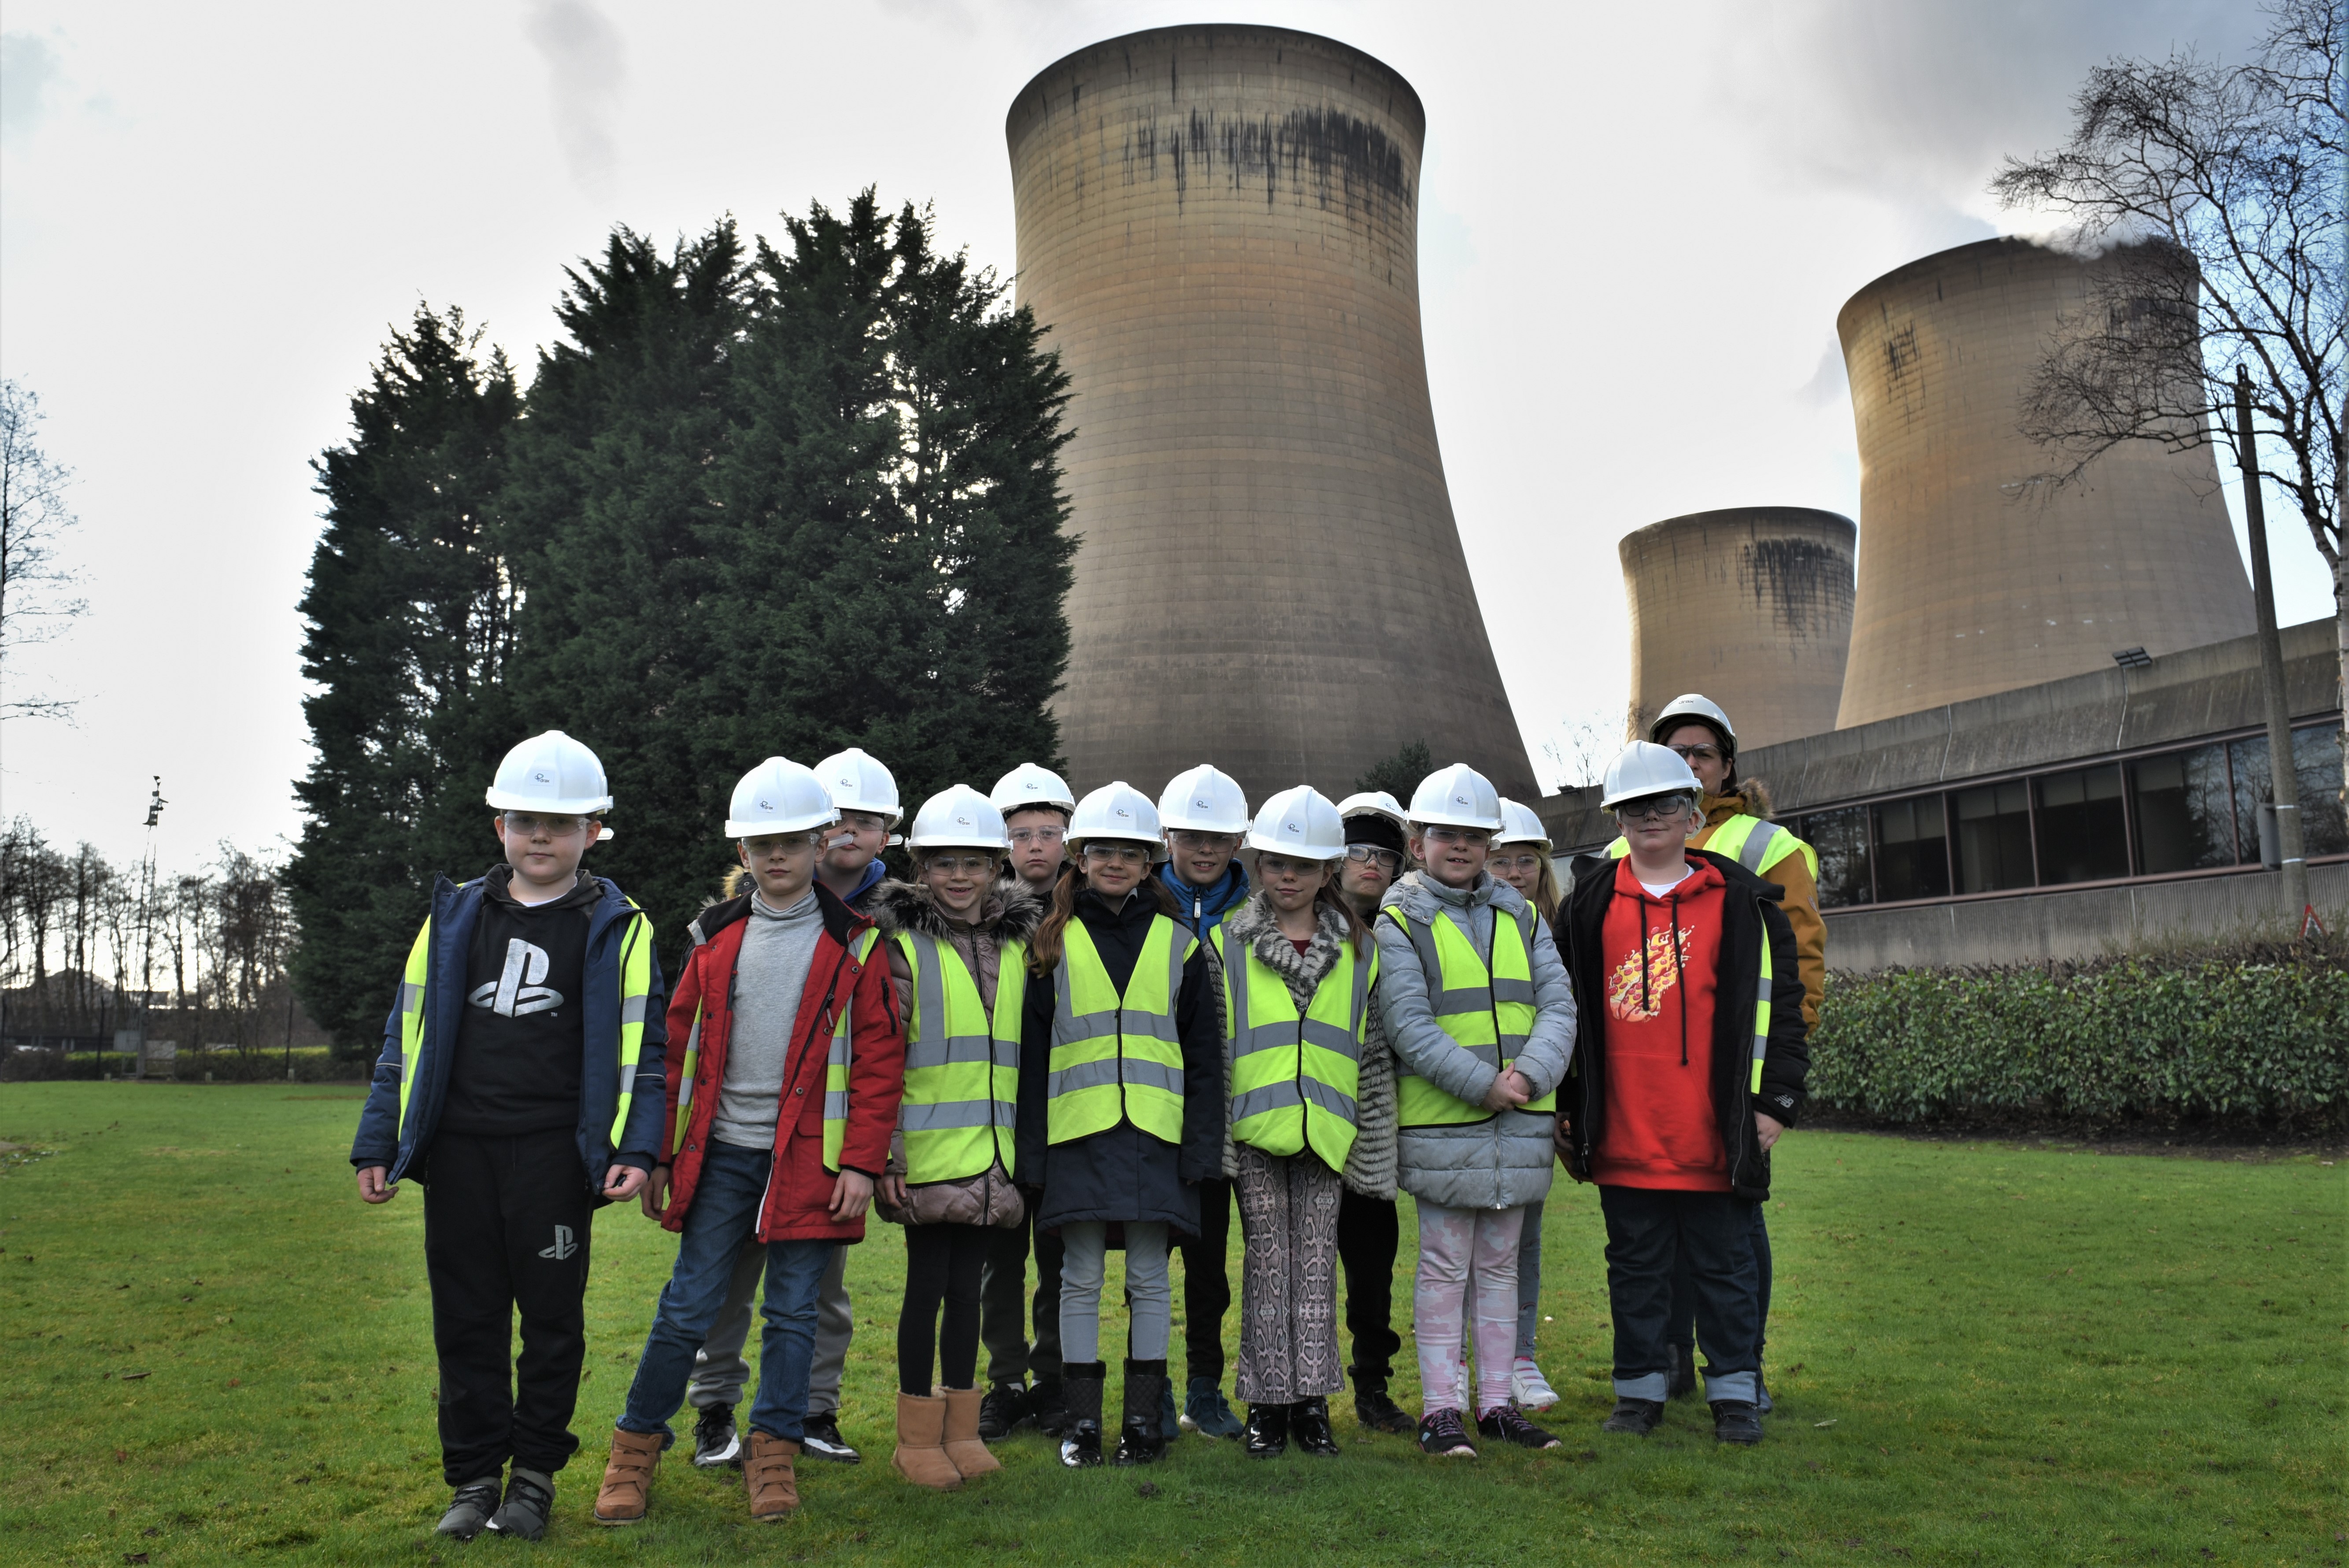 Students from Waltham Leas outside the cooling towers at Drax Power Station